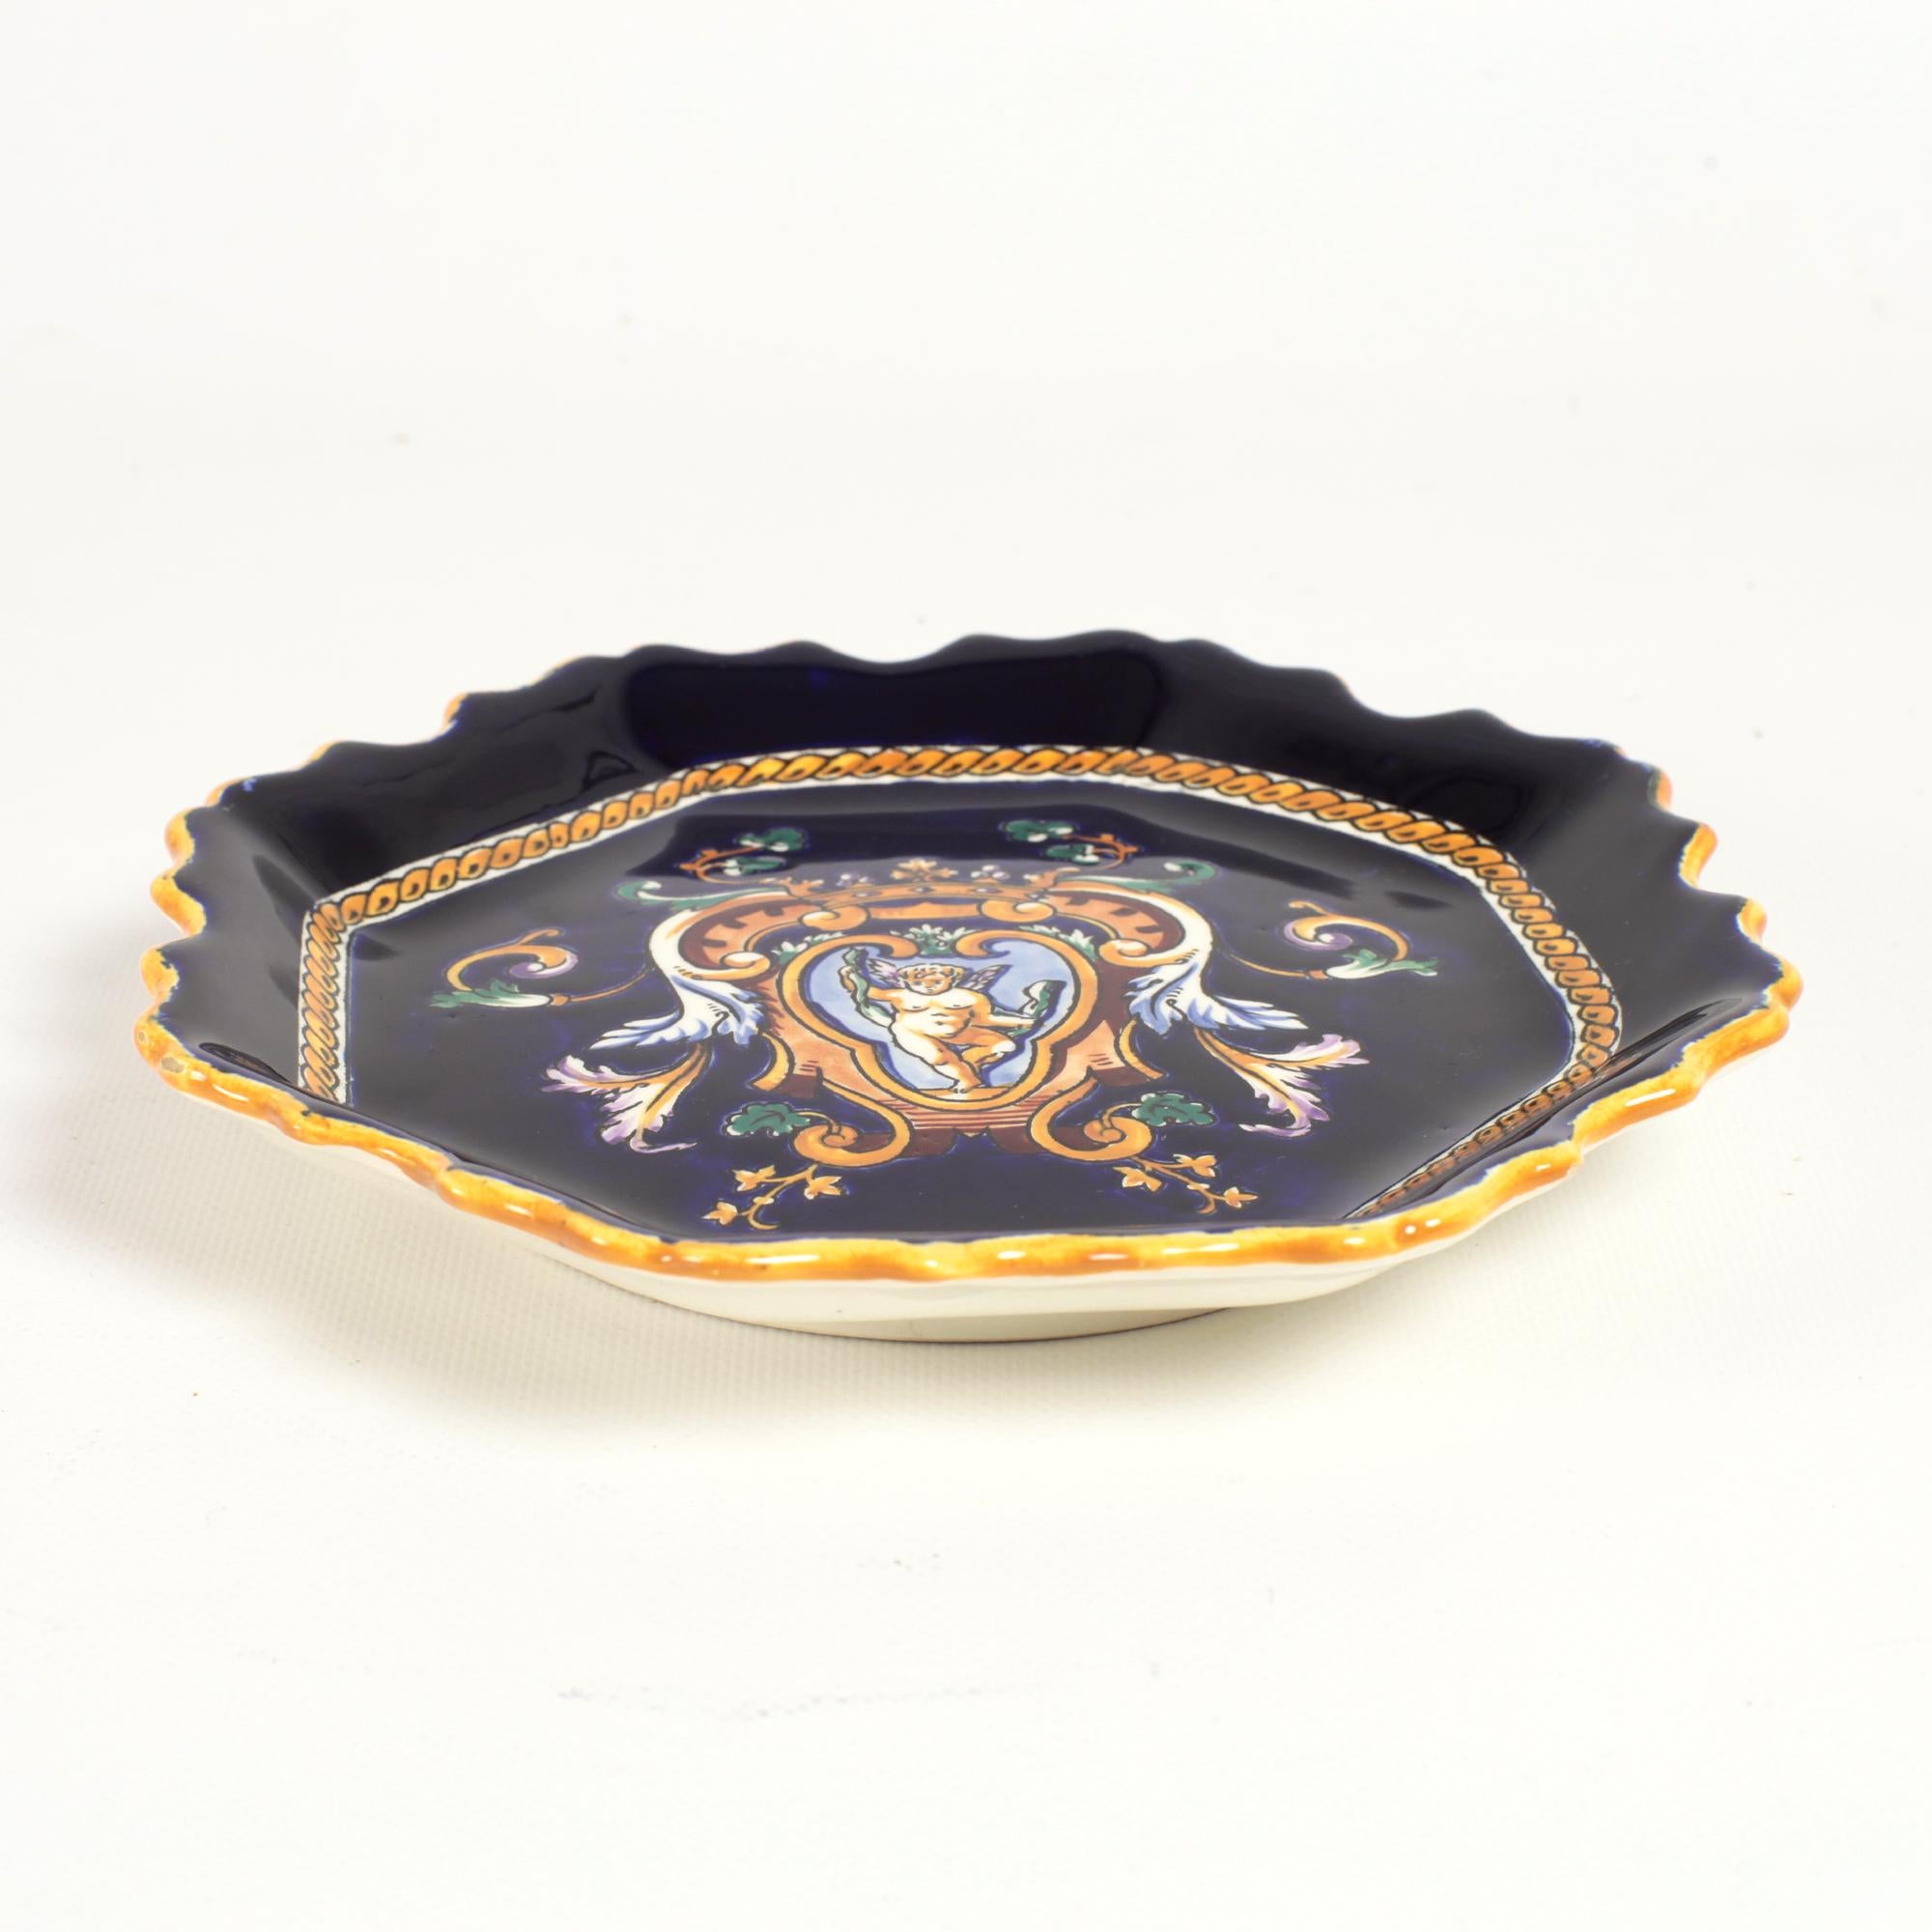 Charming hanging plate from Gien with cobalt blue background for hand painted grotesque decorations inspired by fifteenth-century Italy.
The motifs in yellow, white and brown highlights depict chimeras, scrolls, bearded men, masks, children.
This